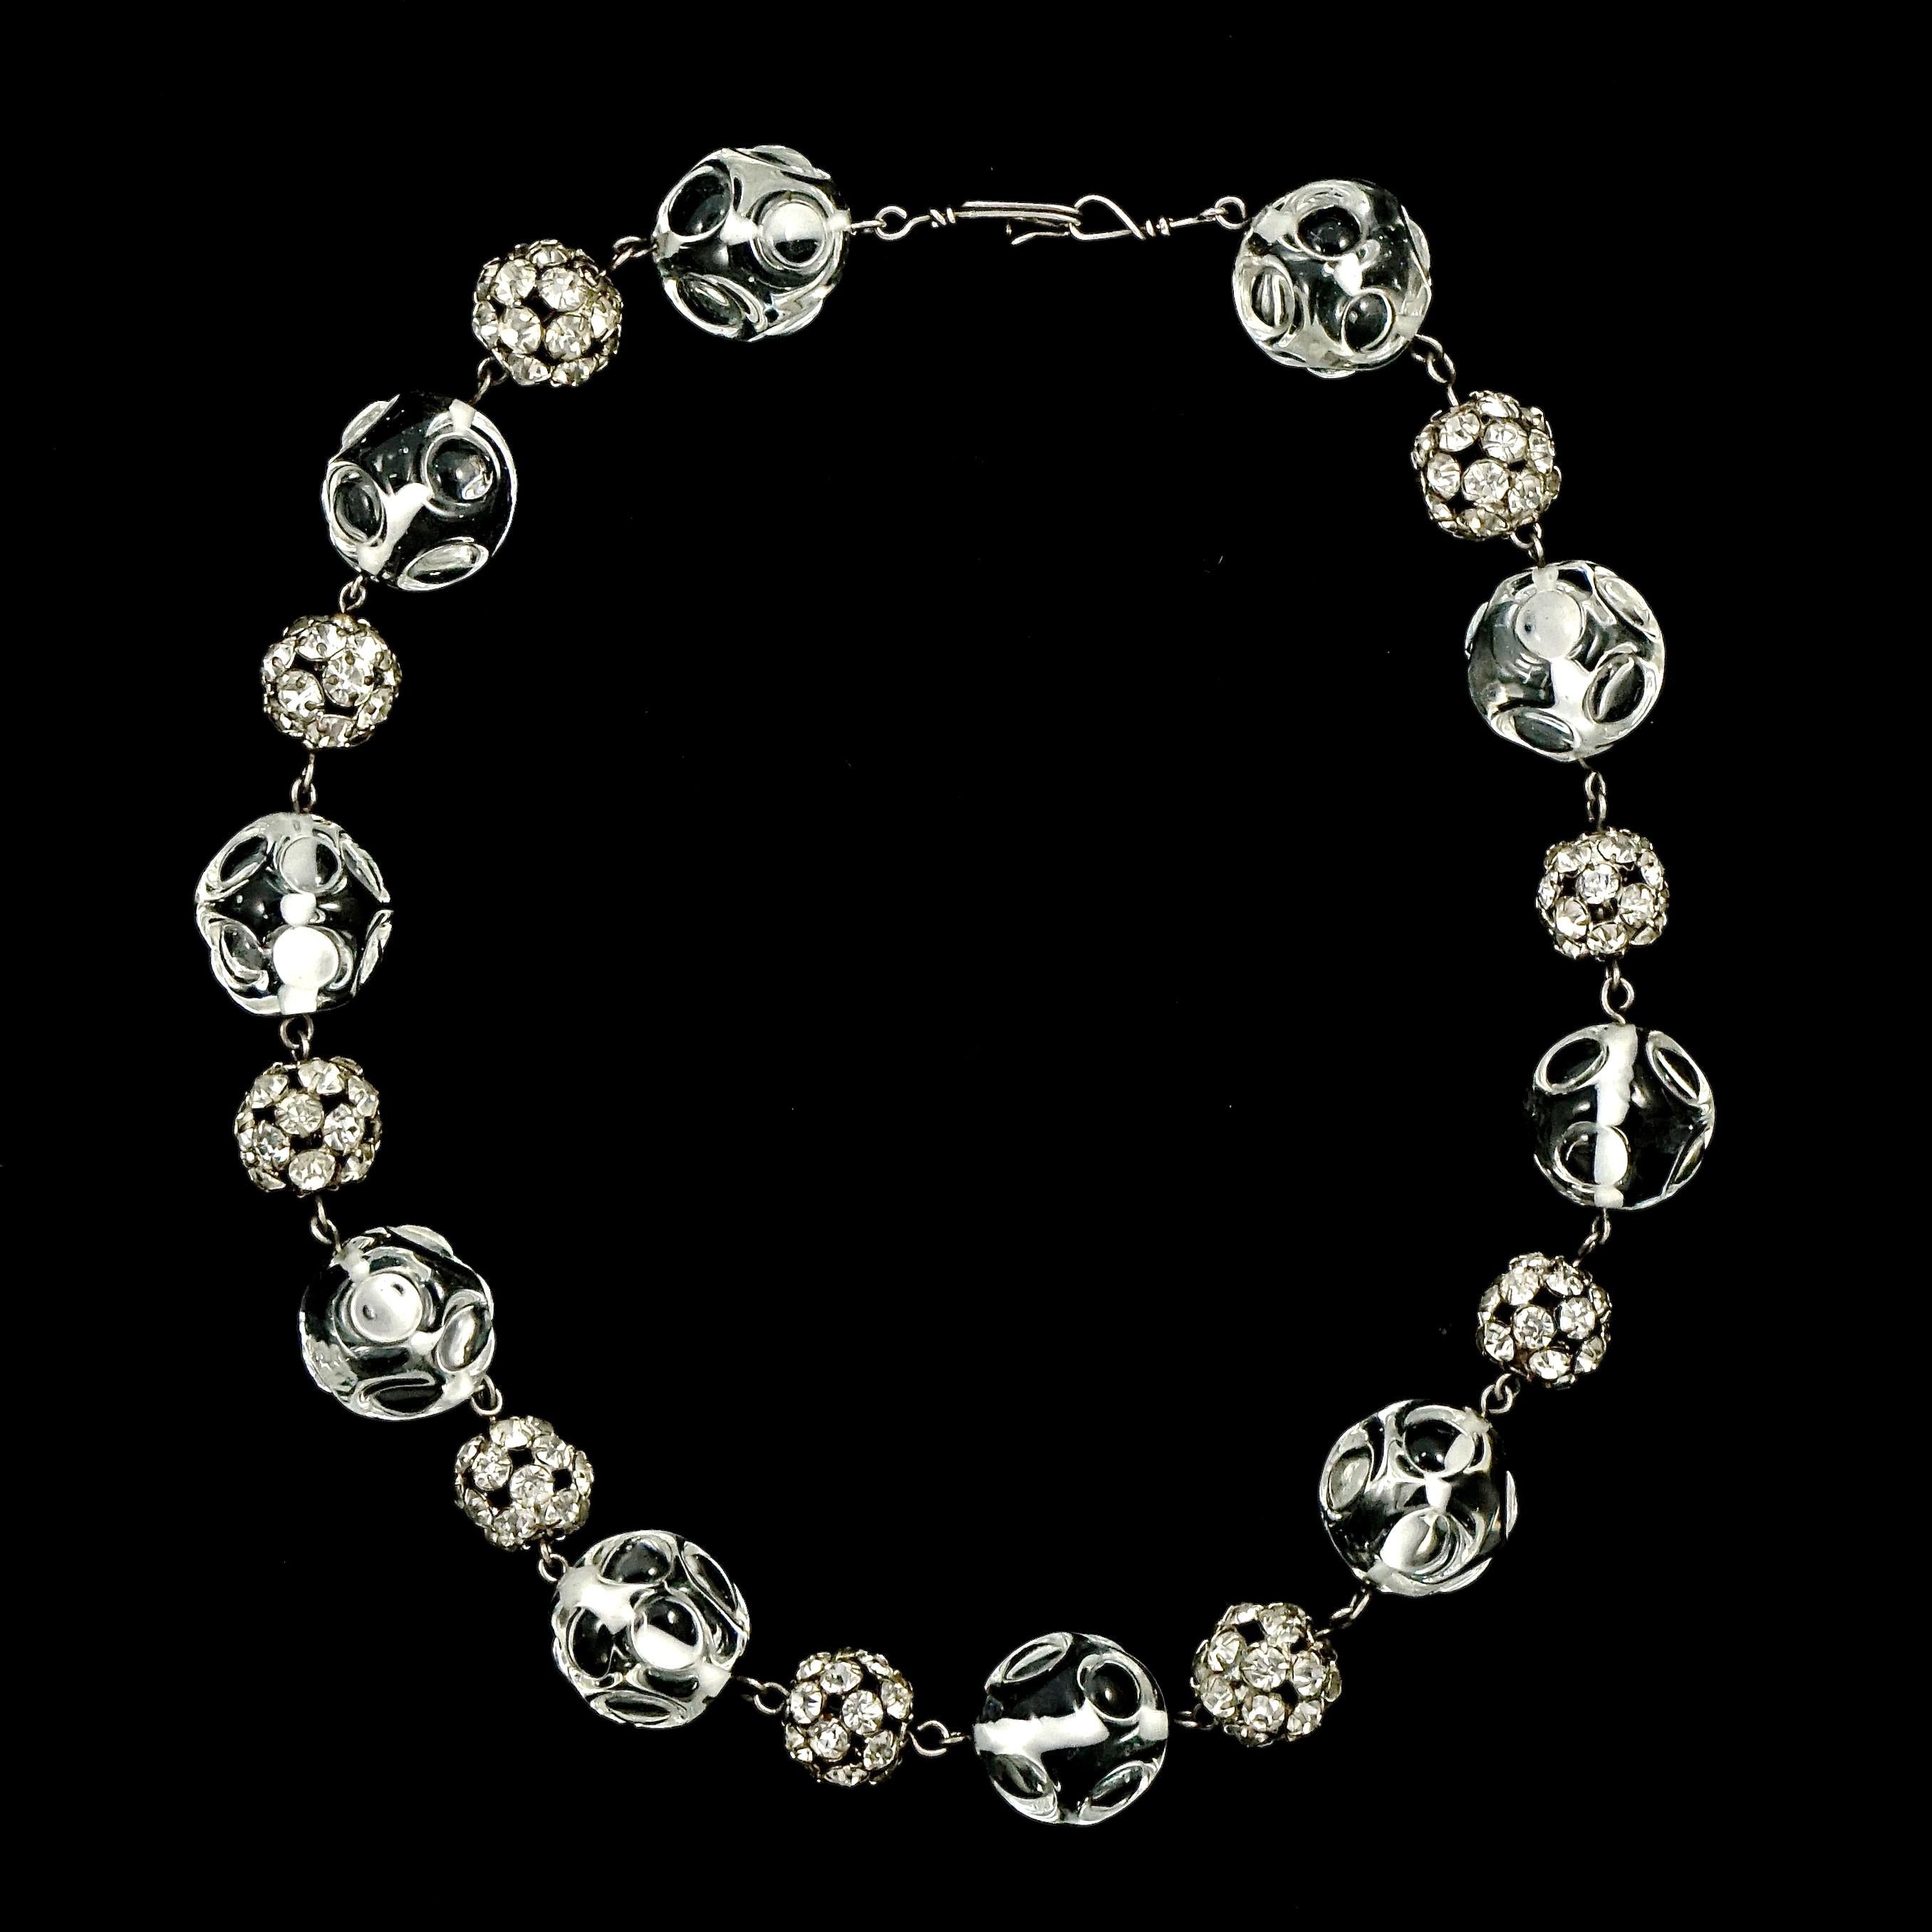 Art Deco Necklace with Clear Glass and Rhinestone Ball Beads on Silver Tone Wire For Sale 2